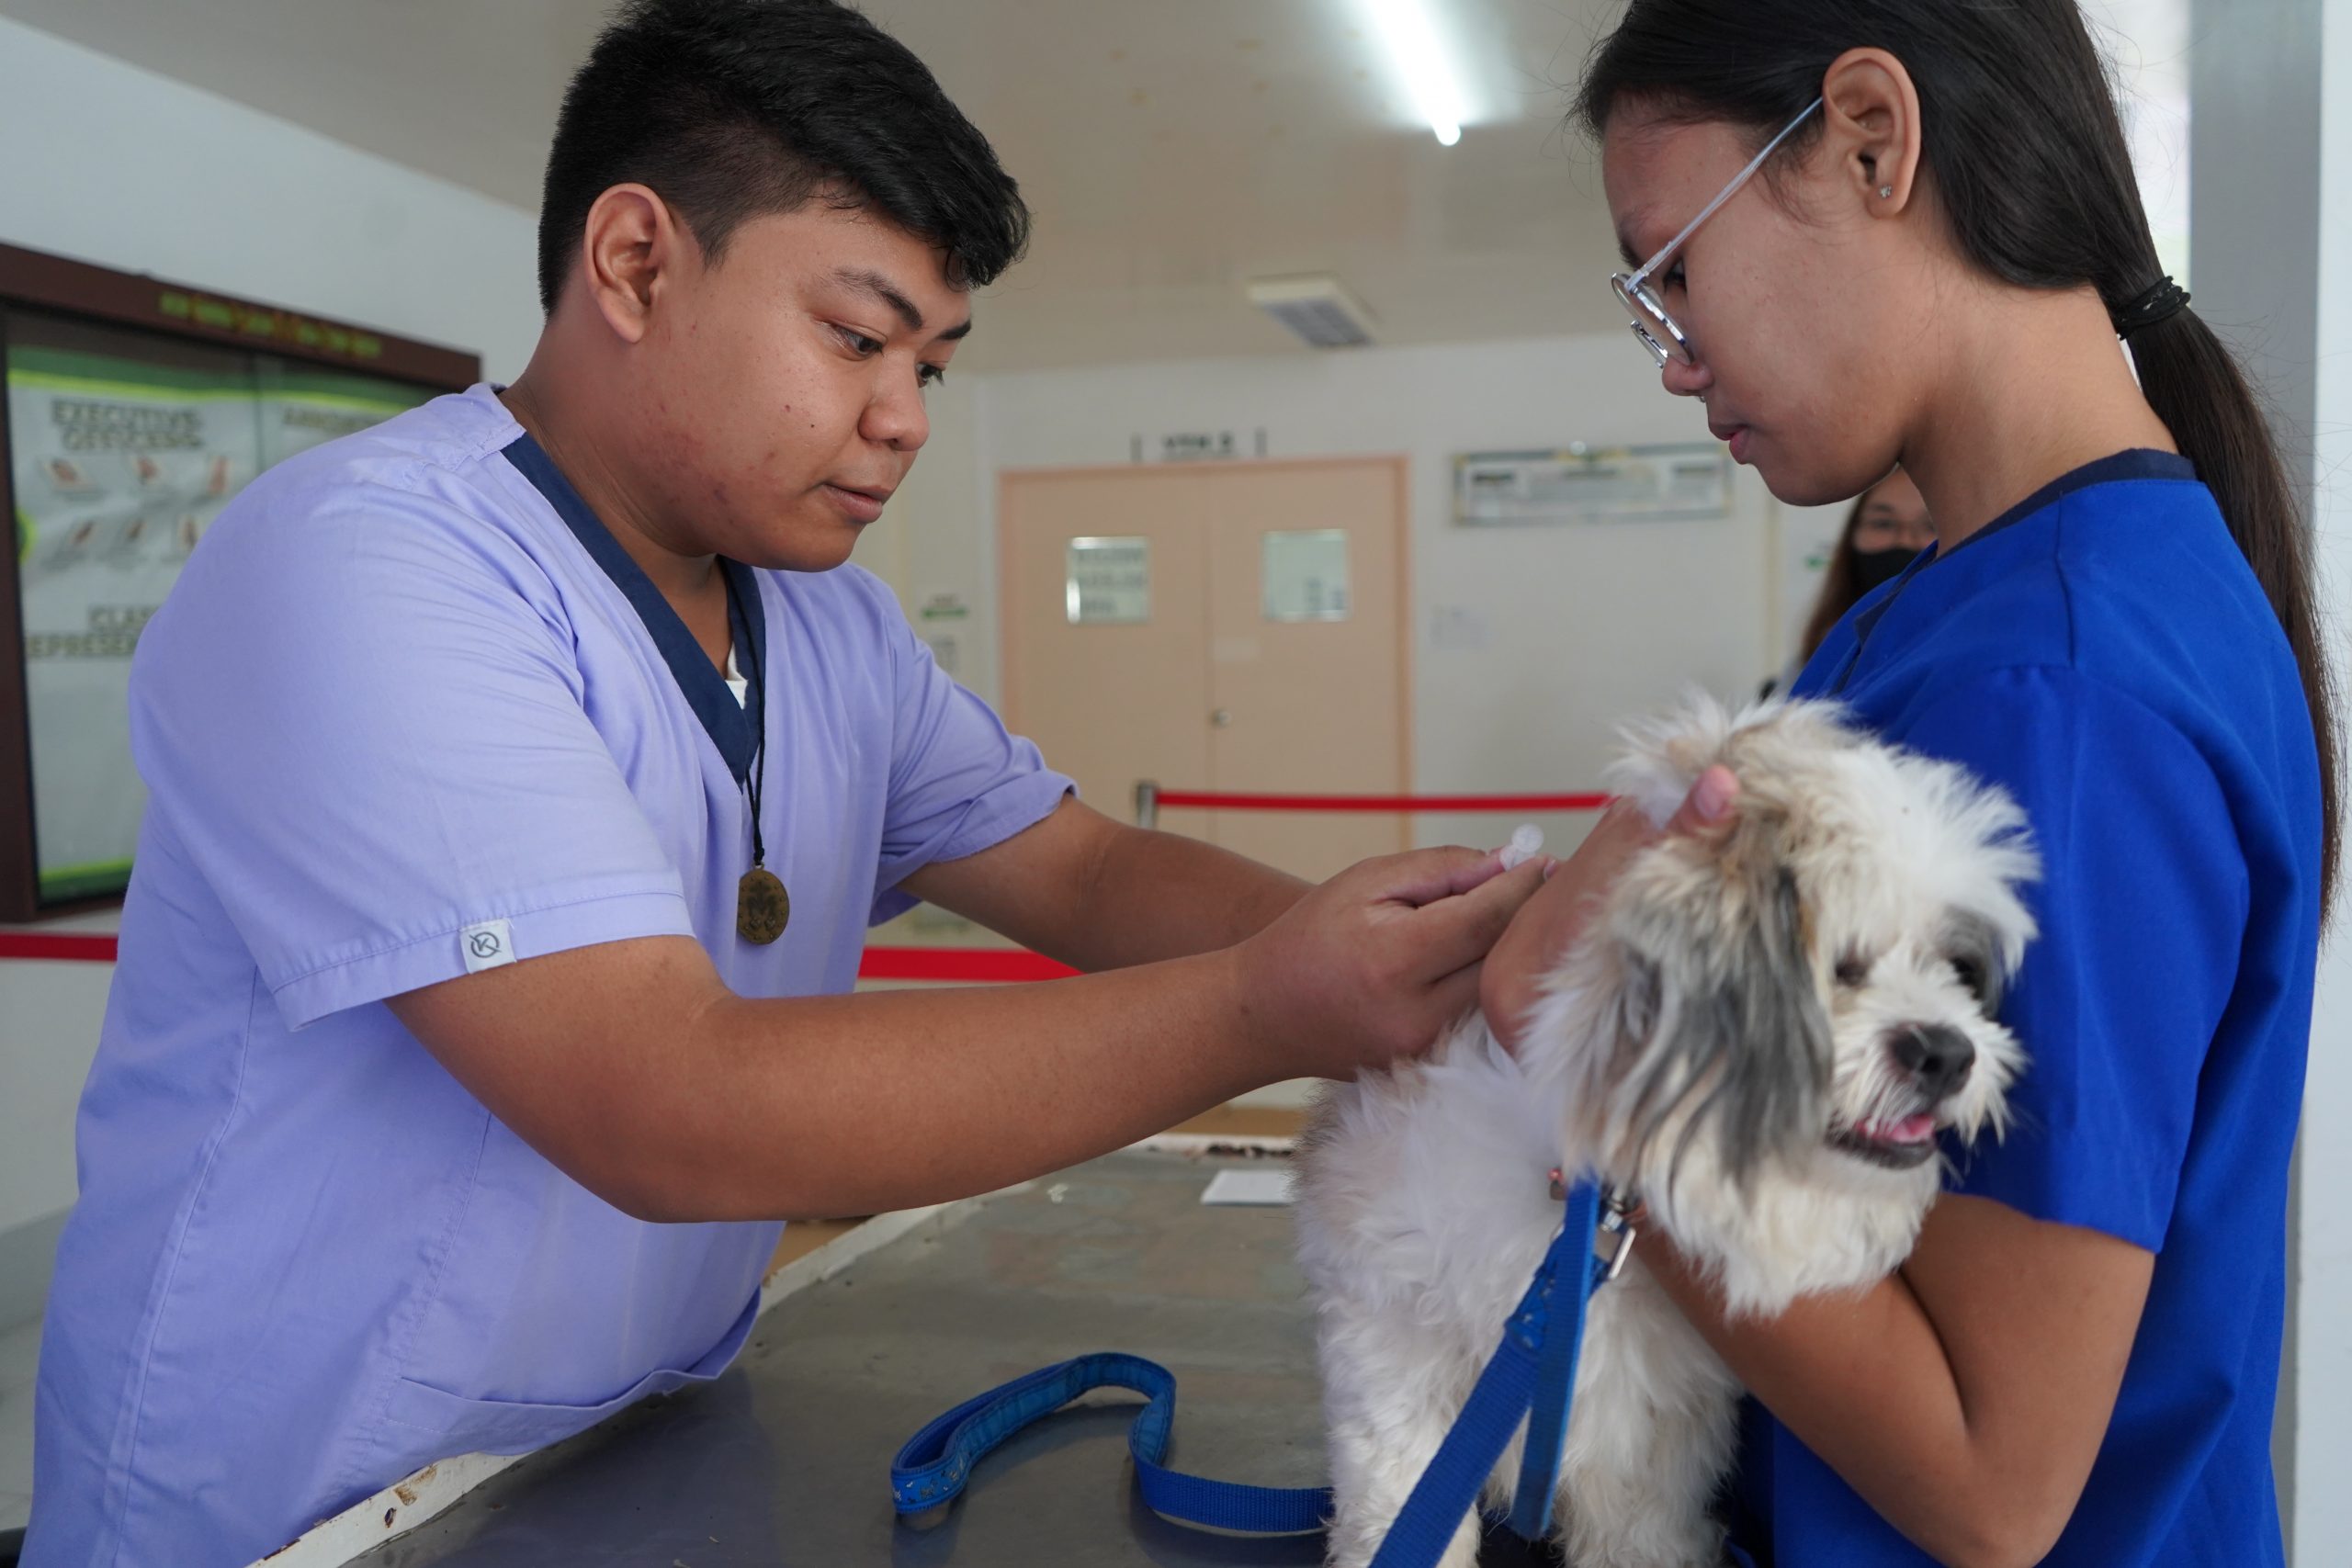 CVM EXTENDS VETERINARY SERVICES TO THE COMMUNITY